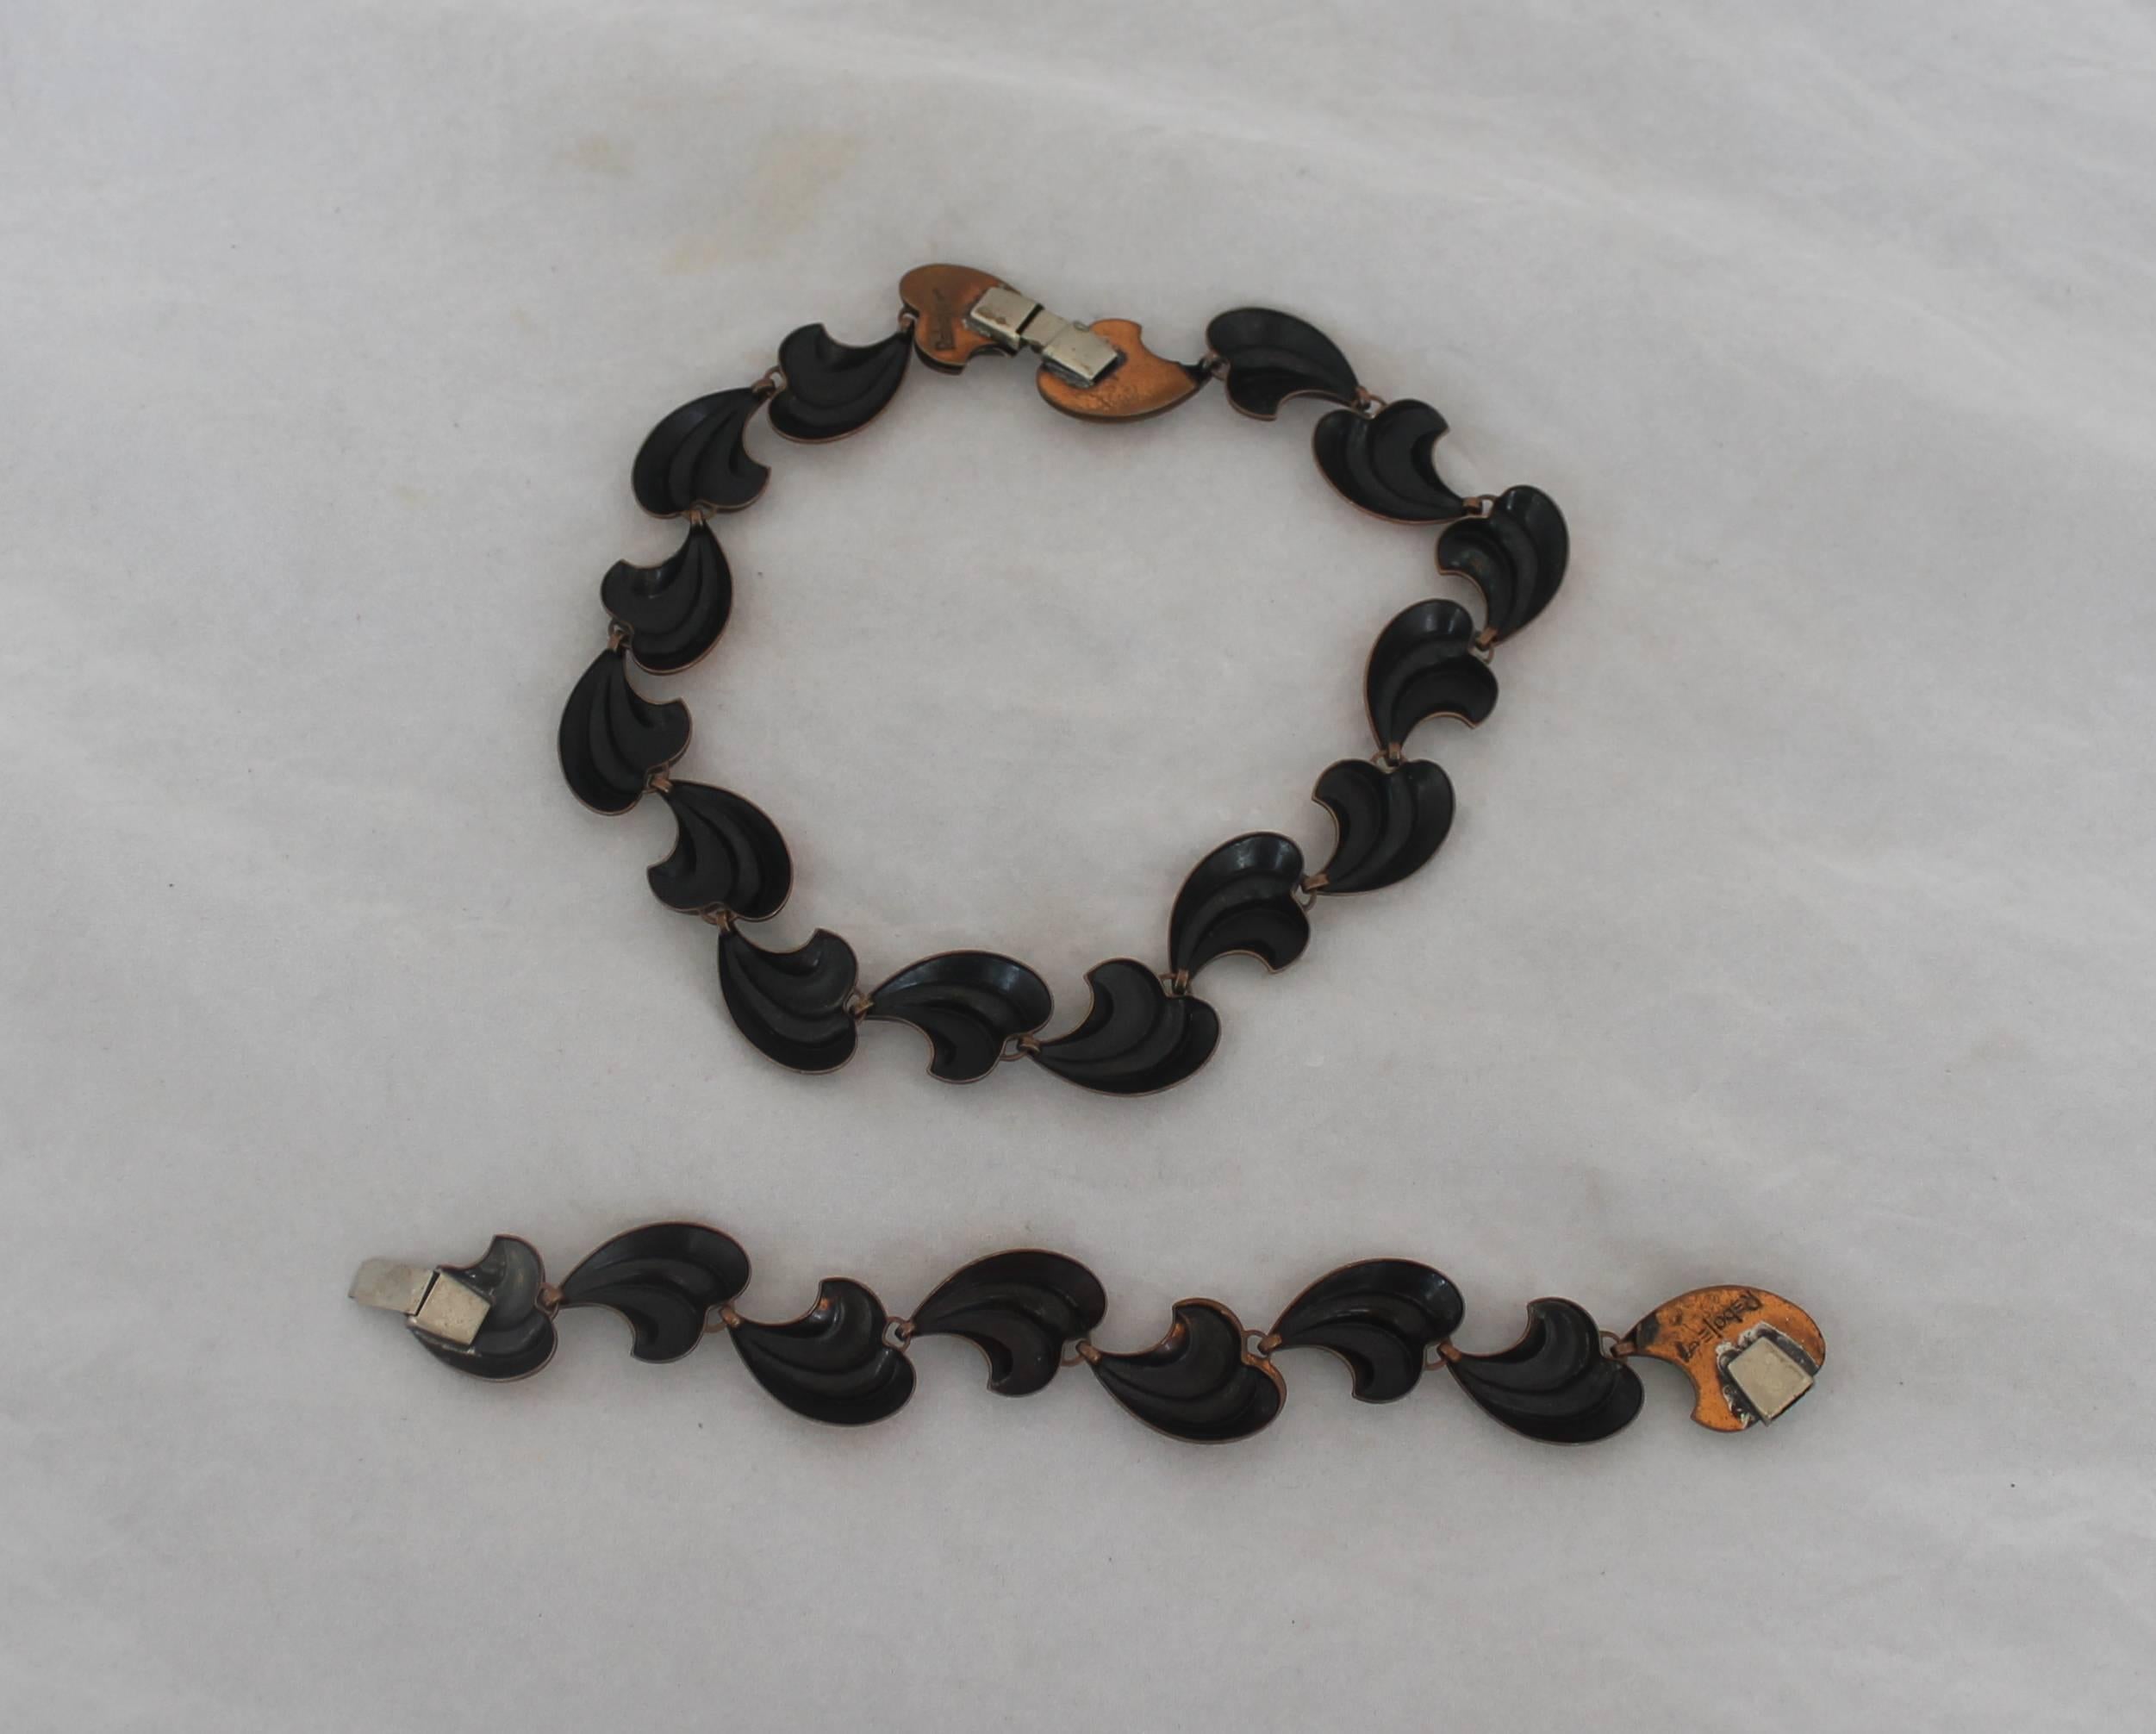 Rebajes Vintage Copper Heart-Shaped Petal Demi Parure - circa 1950's.  This vintage set is in good vintage condition with only some wear consistent with age.  This demi parure set consists of heart-shaped petal necklace and bracelet.  These pieces